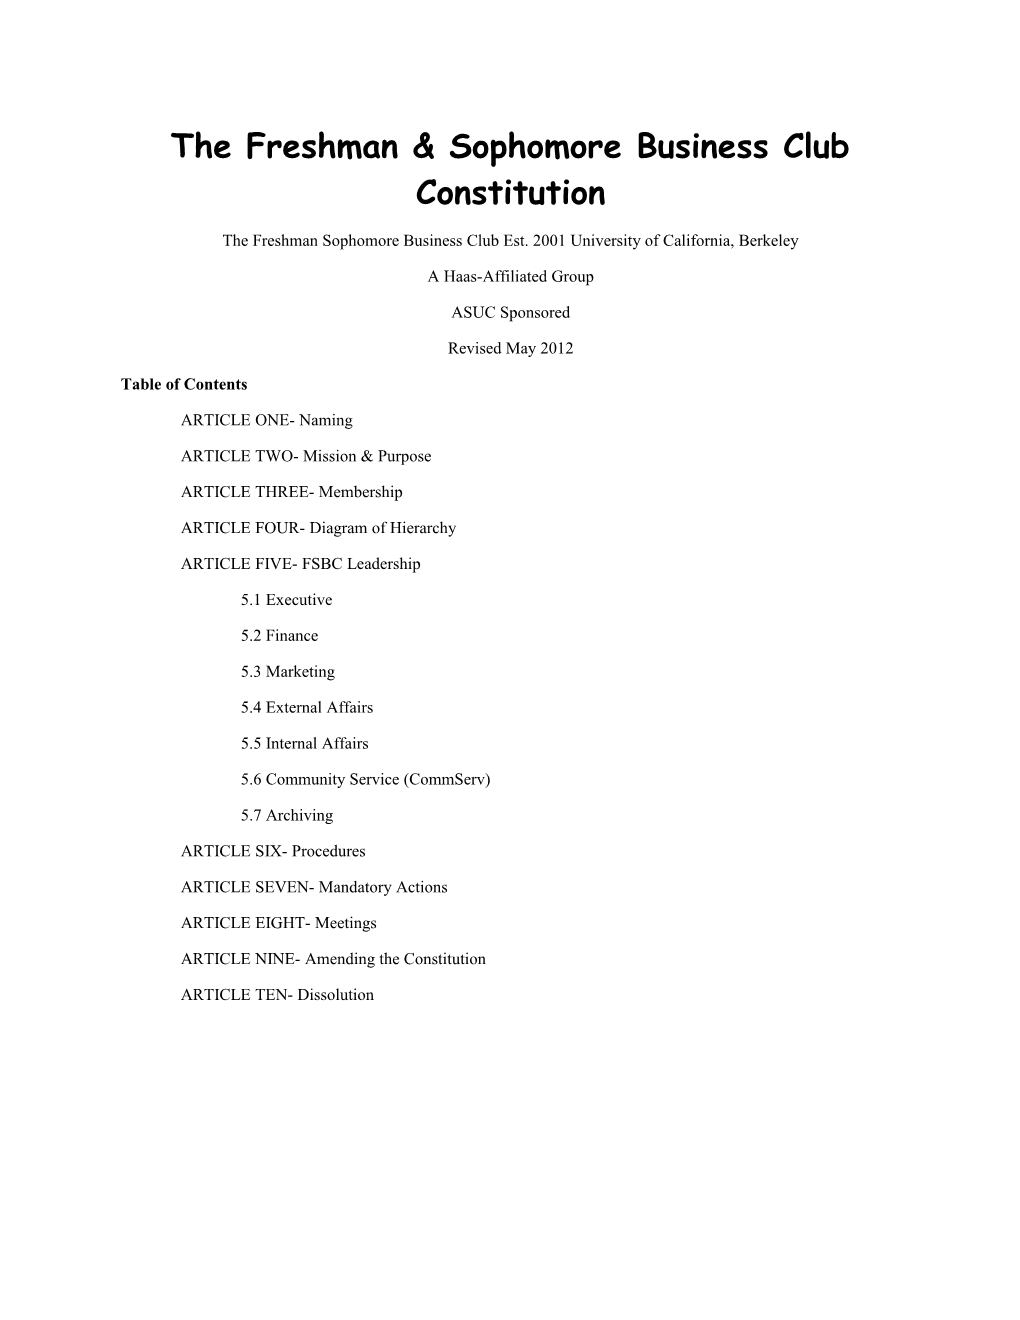 The Freshmansophomore Business Club Constitution